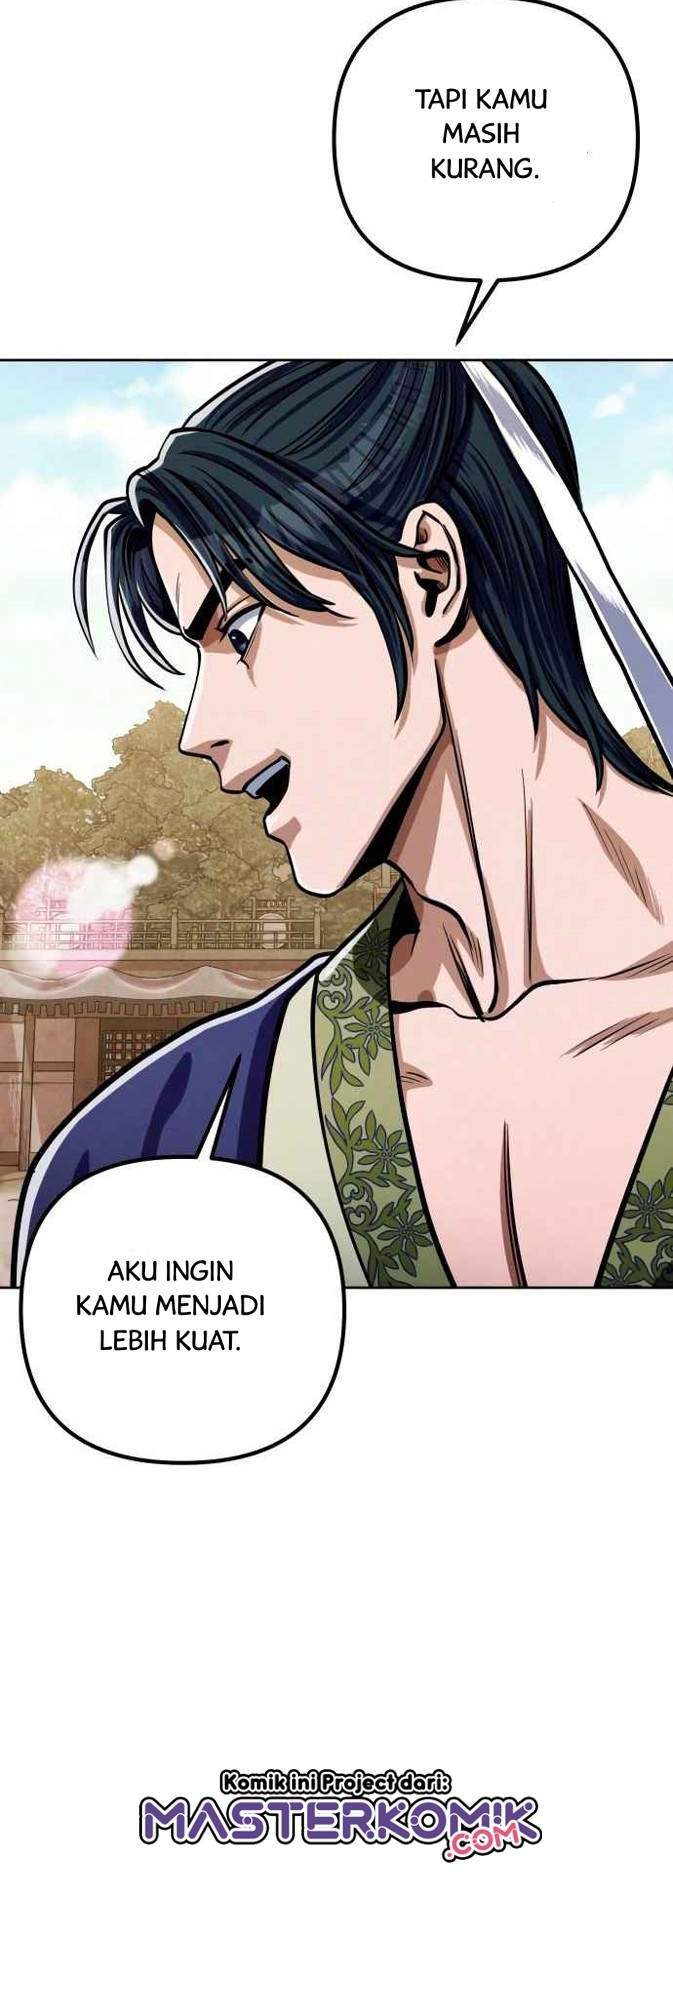 Ha Buk Paeng’s Youngest Son Chapter 8 40